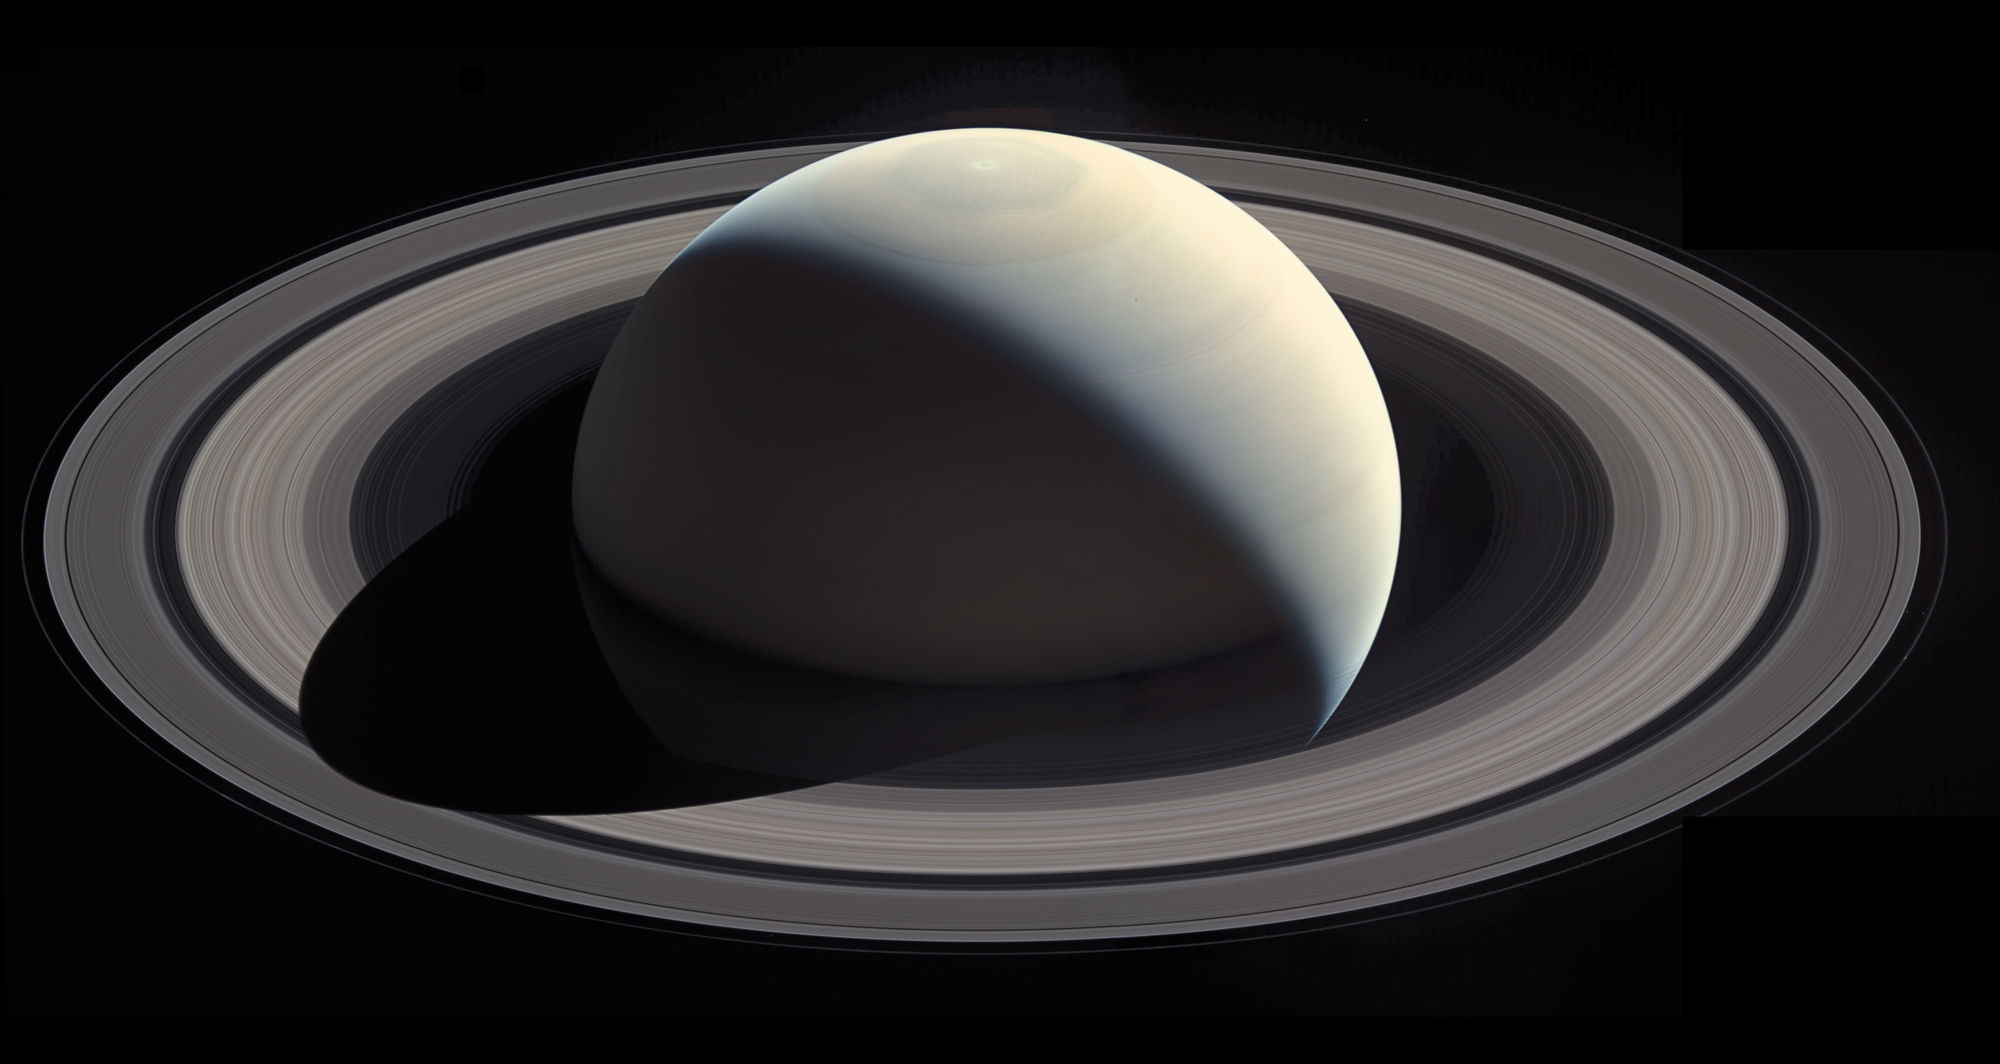 This magnificent view of Saturn was created using images taken by Cassini on October 28, 2016, and merged into a mosaic by Ian Regan. Credit: NASA / JPL / SSI / Ian Regan